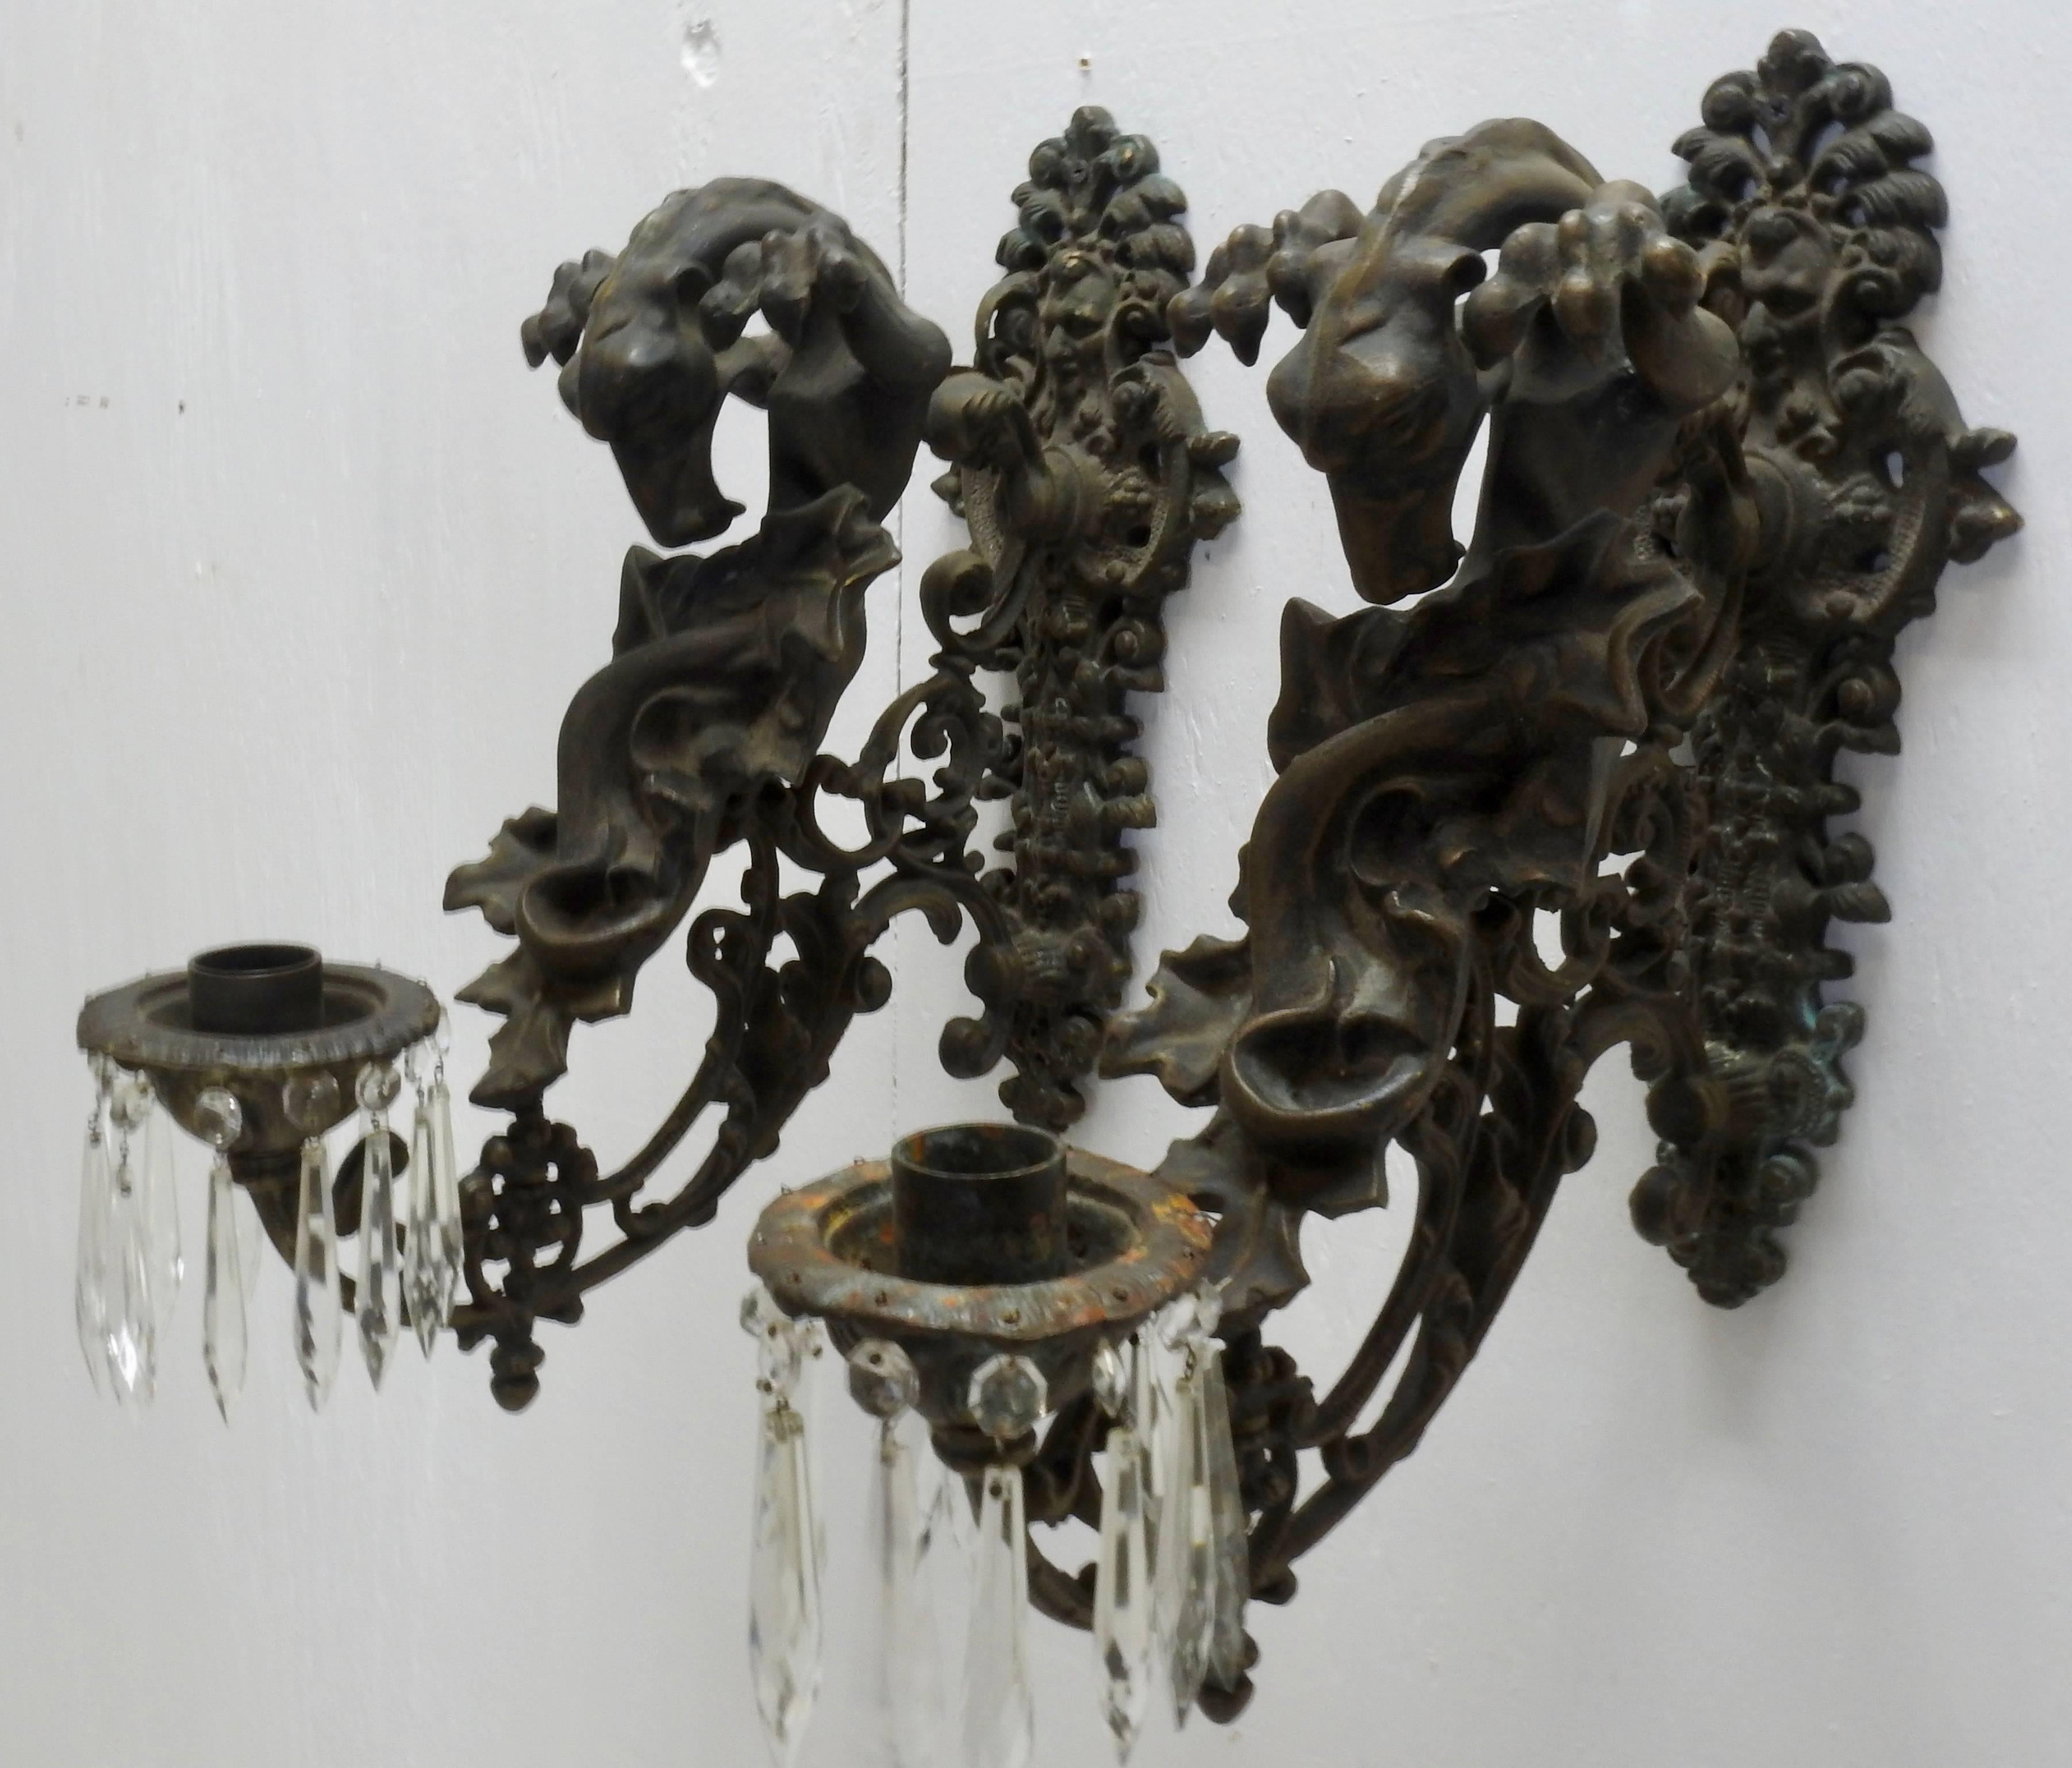 A unique pair of Gothic Gargoyle candle sconces with amazing details. The gargoyles are looking down to the spot where candles or a wired light would be. They have there claws up and curled and all the gorgeous scrollwork and foliate detail below is